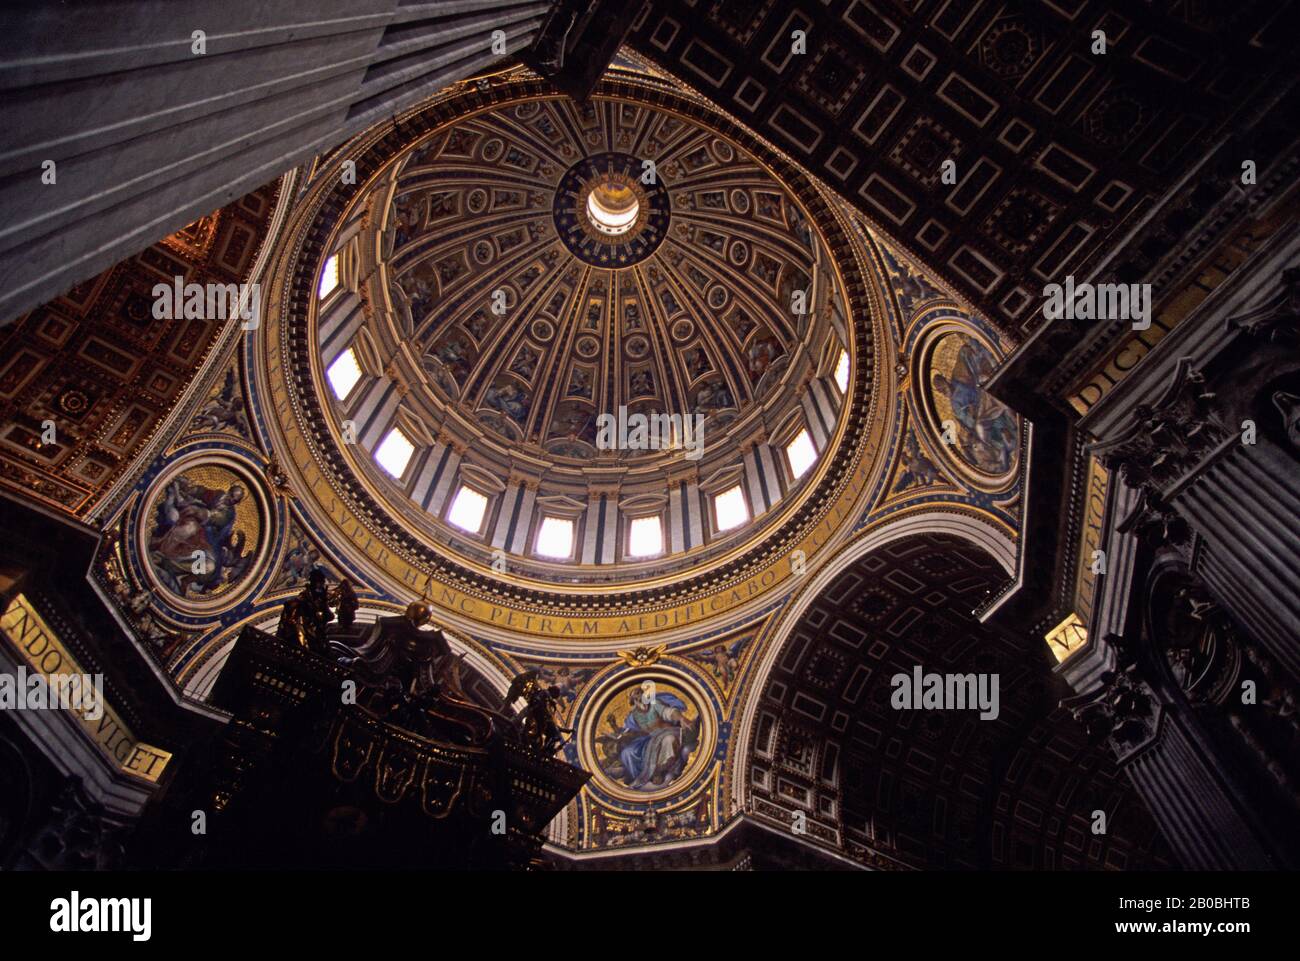 ITALY, ROME, VATICAN, ST. PETER'S SQUARE, ST. PETER'S BASILICA, INTERIOR, MICHELANGELO'S DOME Stock Photo